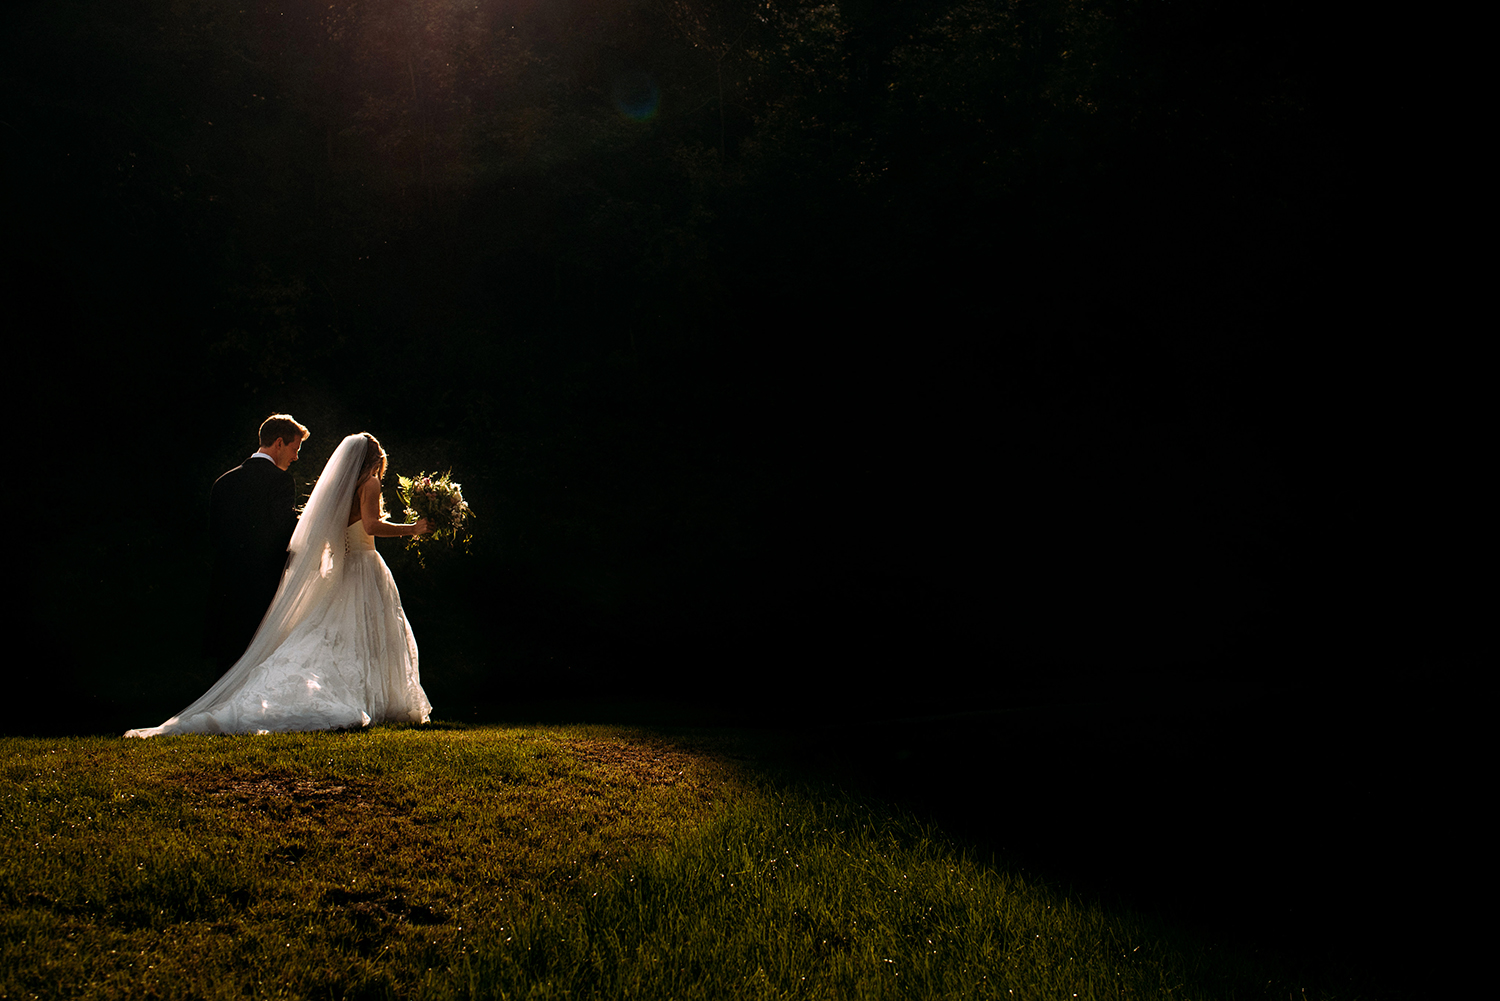  bride and groom walking through nice light into a darker area 